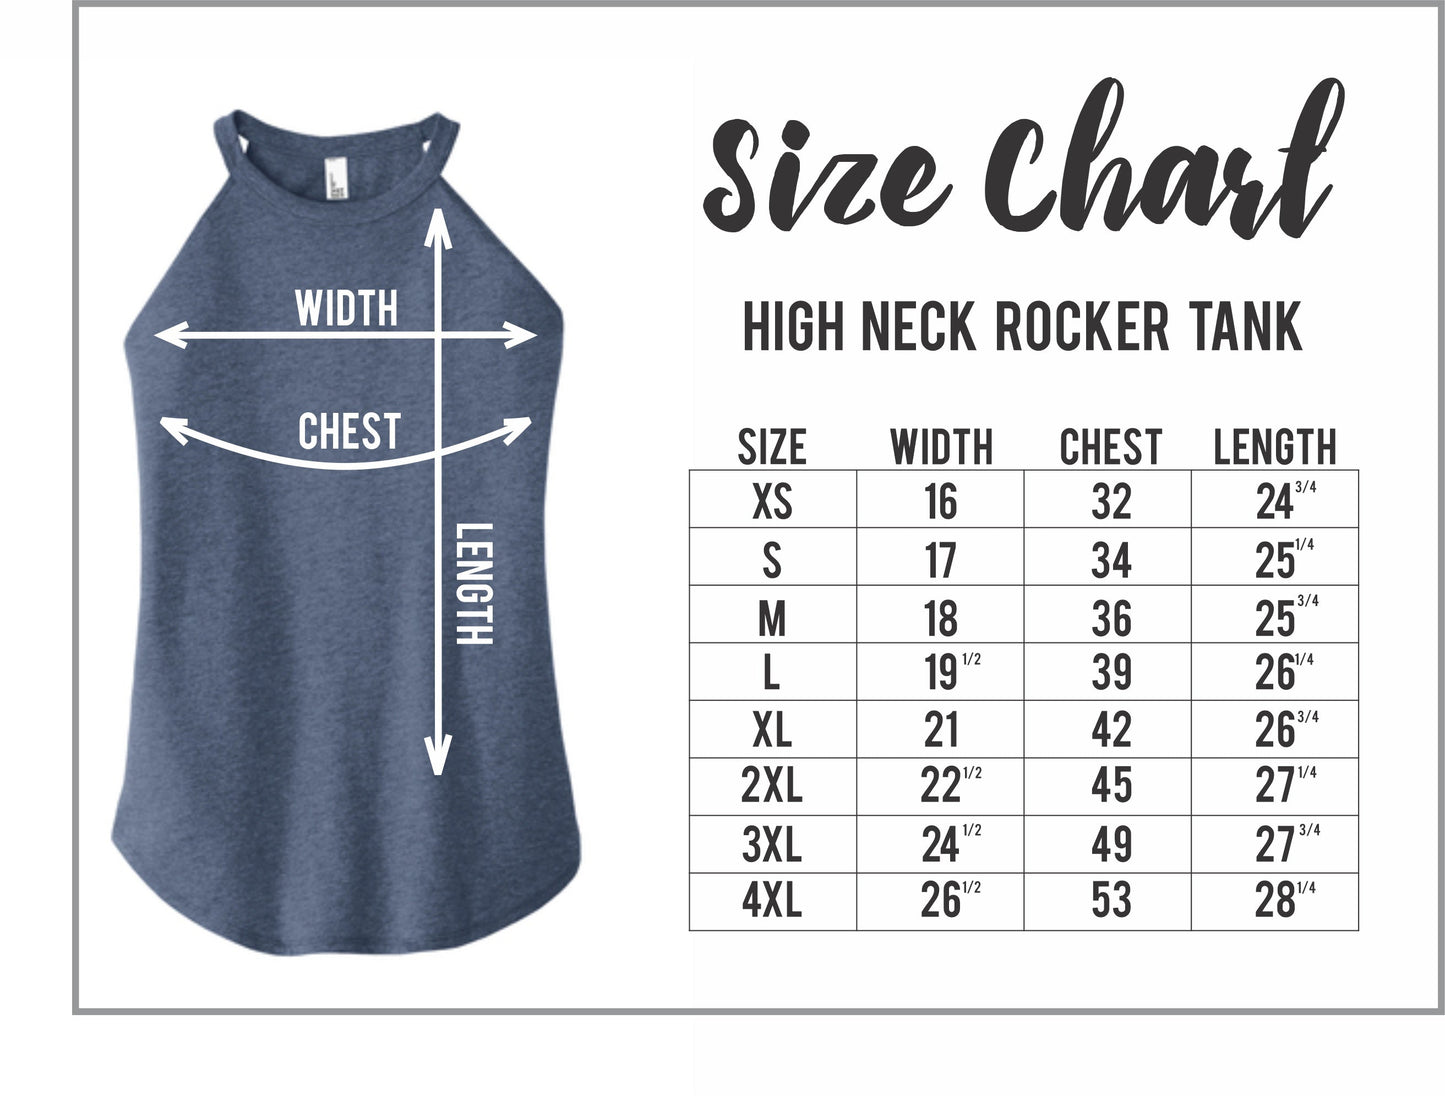 It's Time for Happy Hour at my Favorite Bar - High Neck Rocker Tank